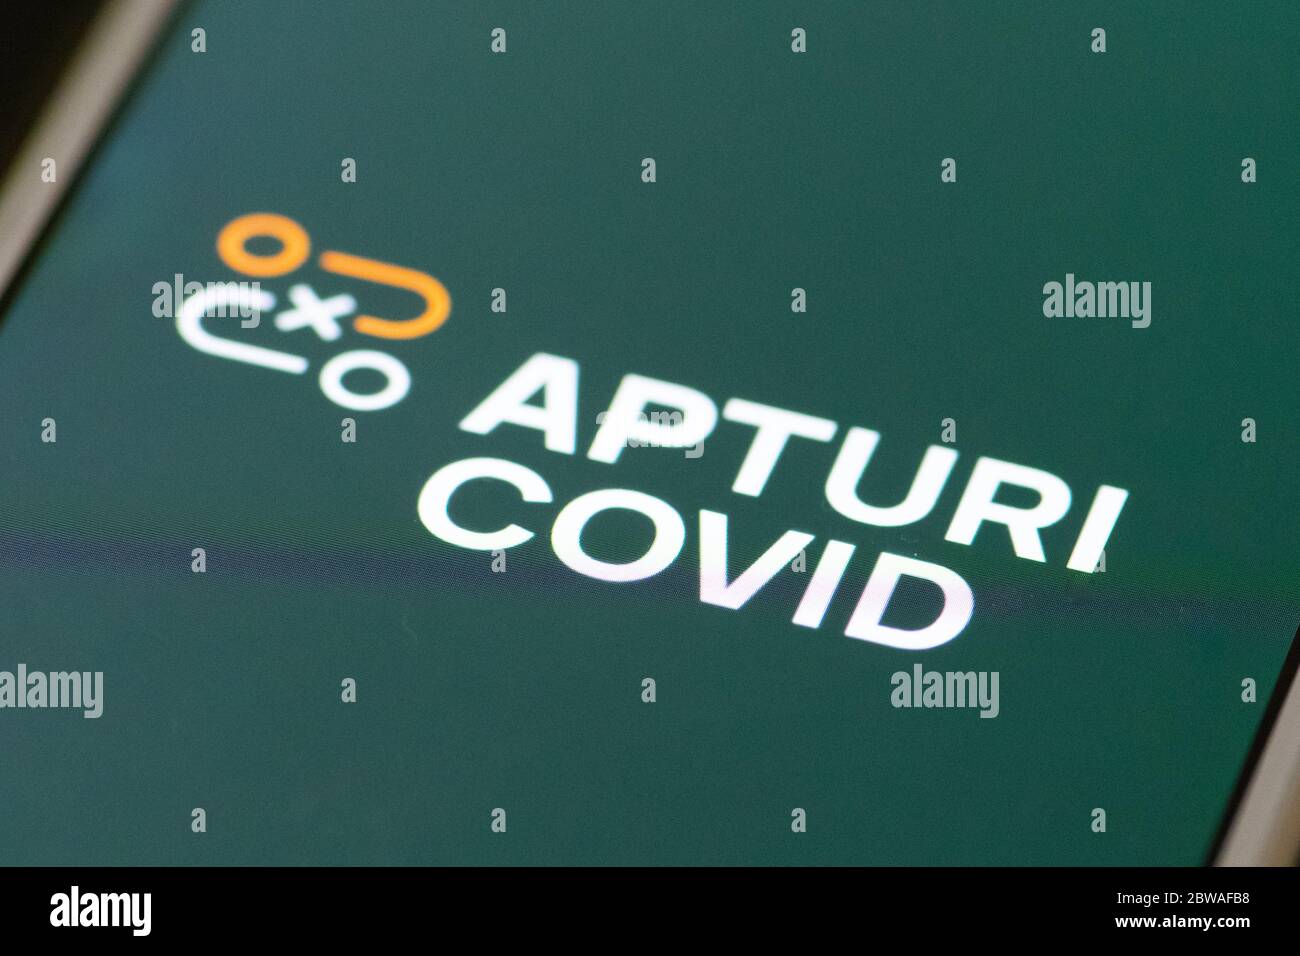 Stop Covid, Apturi Covid, official COVID-19 or Coronavirus contact tracing app for Latvia, Europe, first application in the world Stock Photo